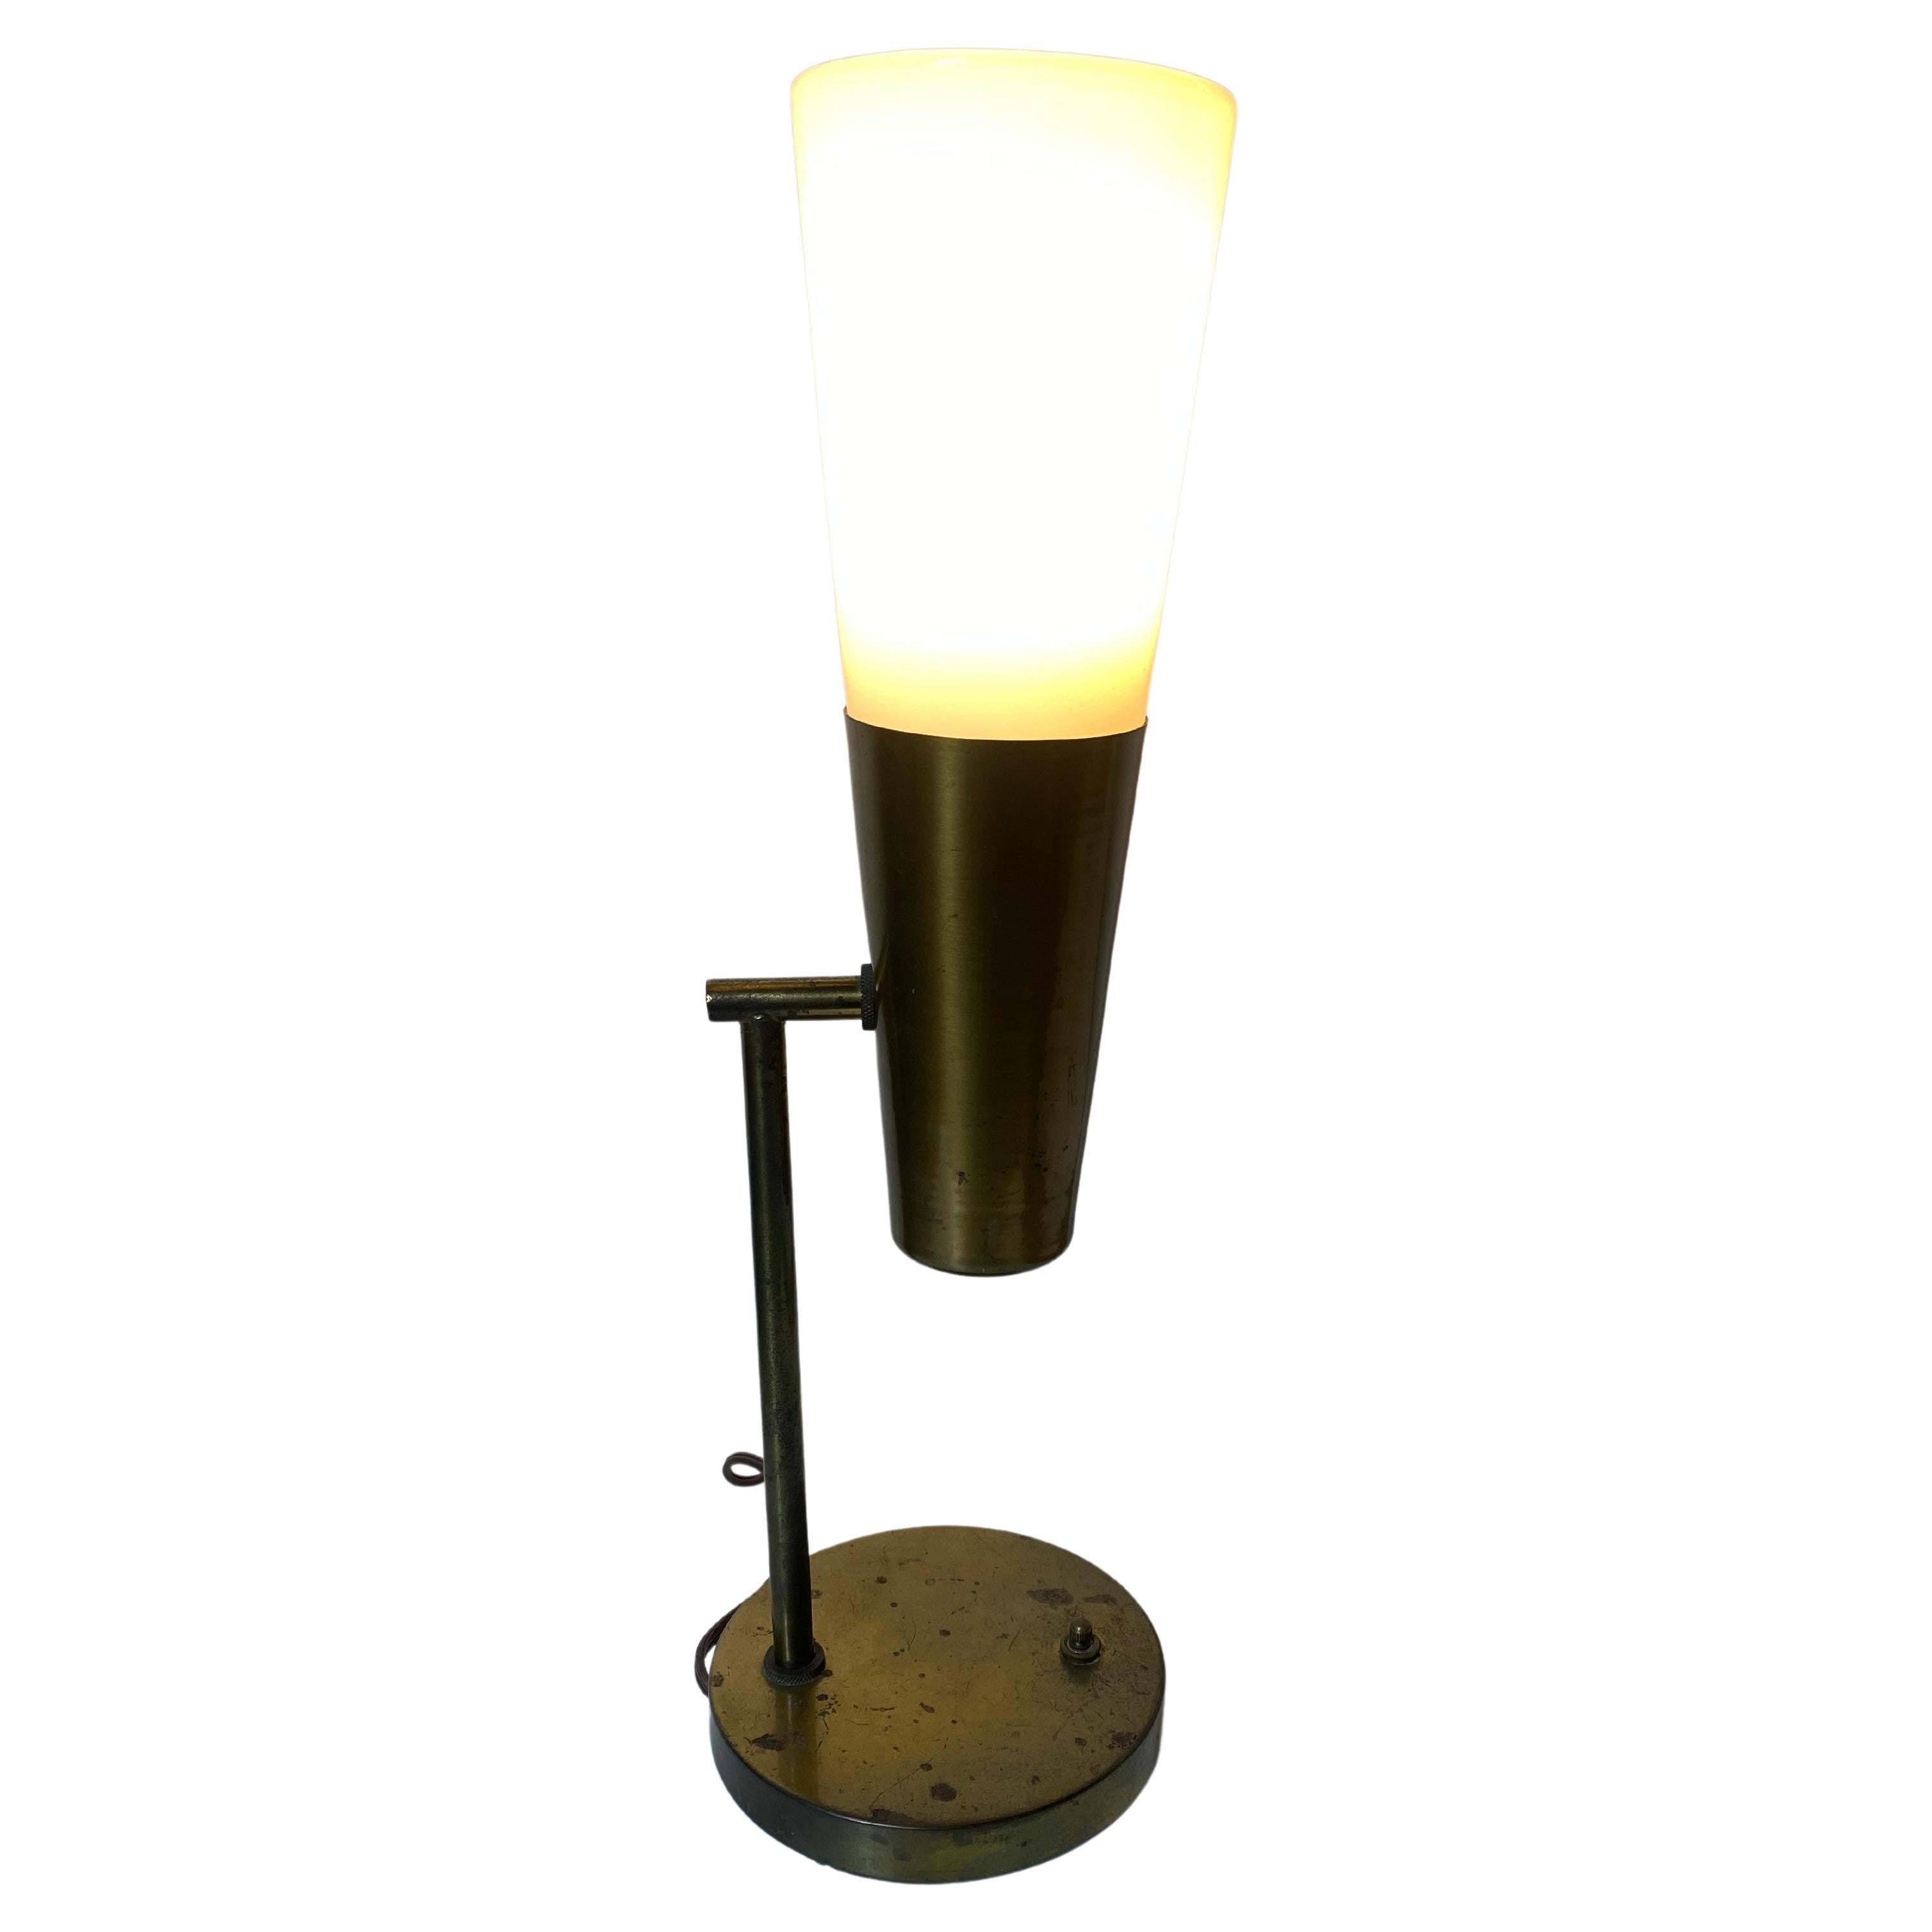 Rare Modernist Brass and Glass Lamp designed by Paul McCobb For Sale